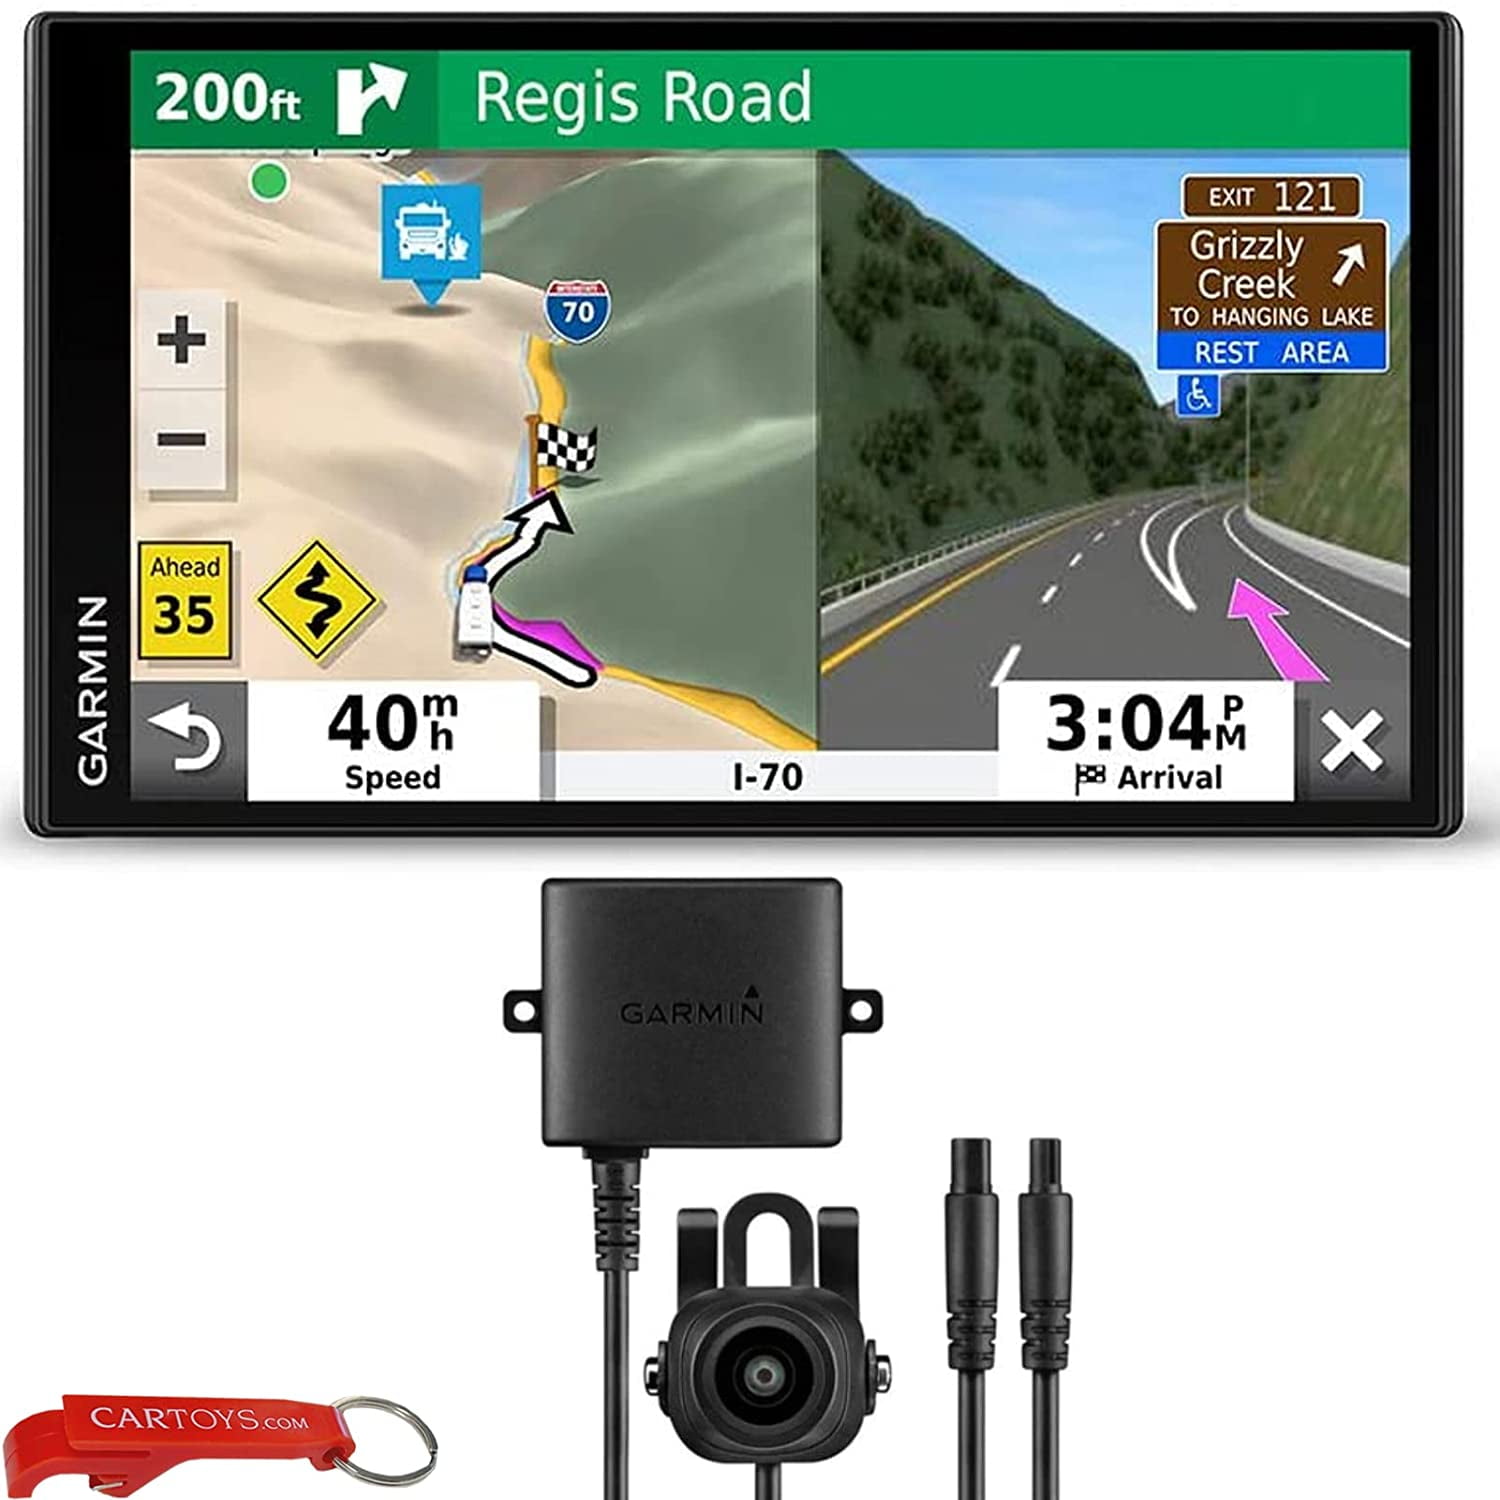 Garmin RV GPS Navigator Safe Driver's Bundle with 30 Wireless Backup Camera. RV/Camper Navigation Device with 7" Touchscreen Edge-to-Edge Display, Preloaded Campgrounds, Custom Routing and Mor - Walmart.com